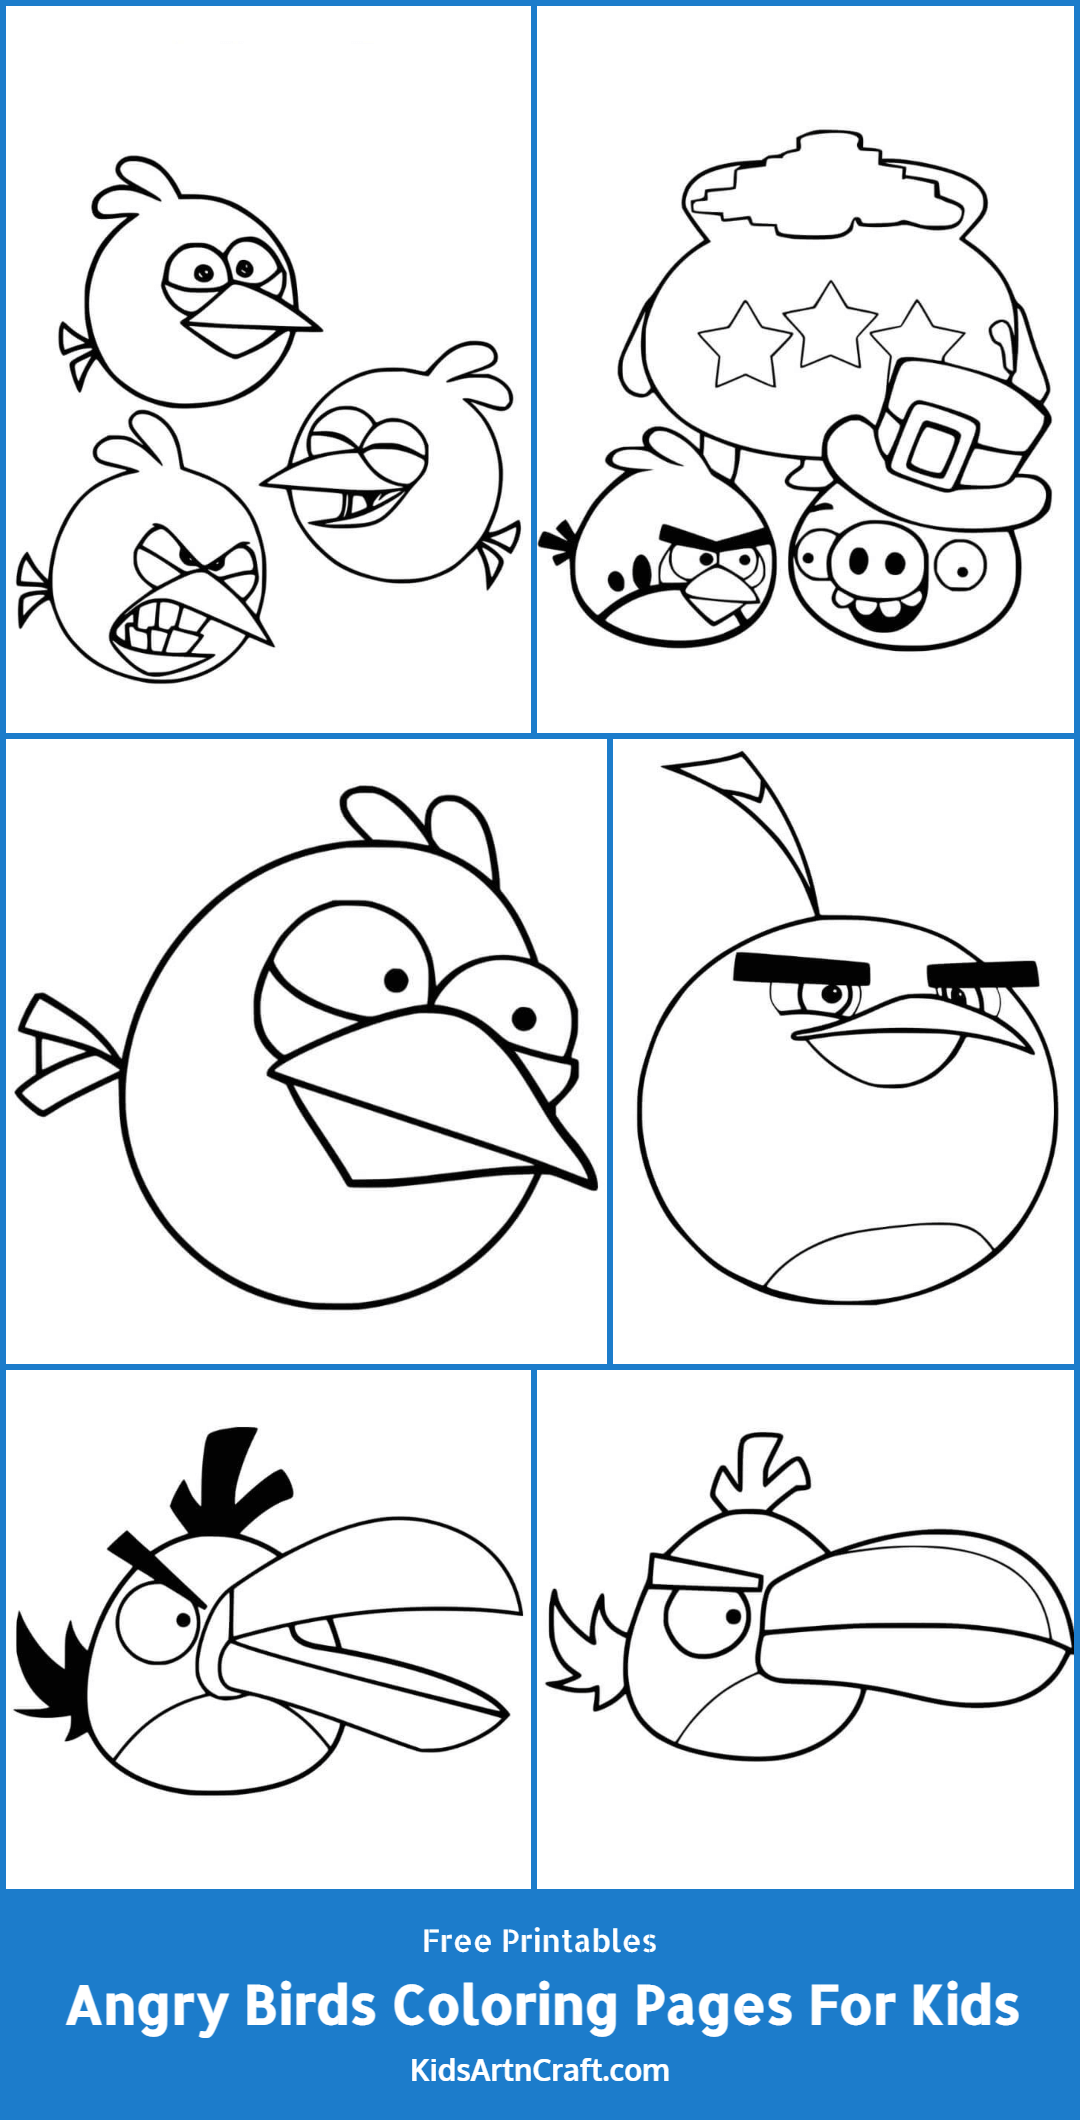 Angry Birds Coloring Pages For Kids – Free Printables